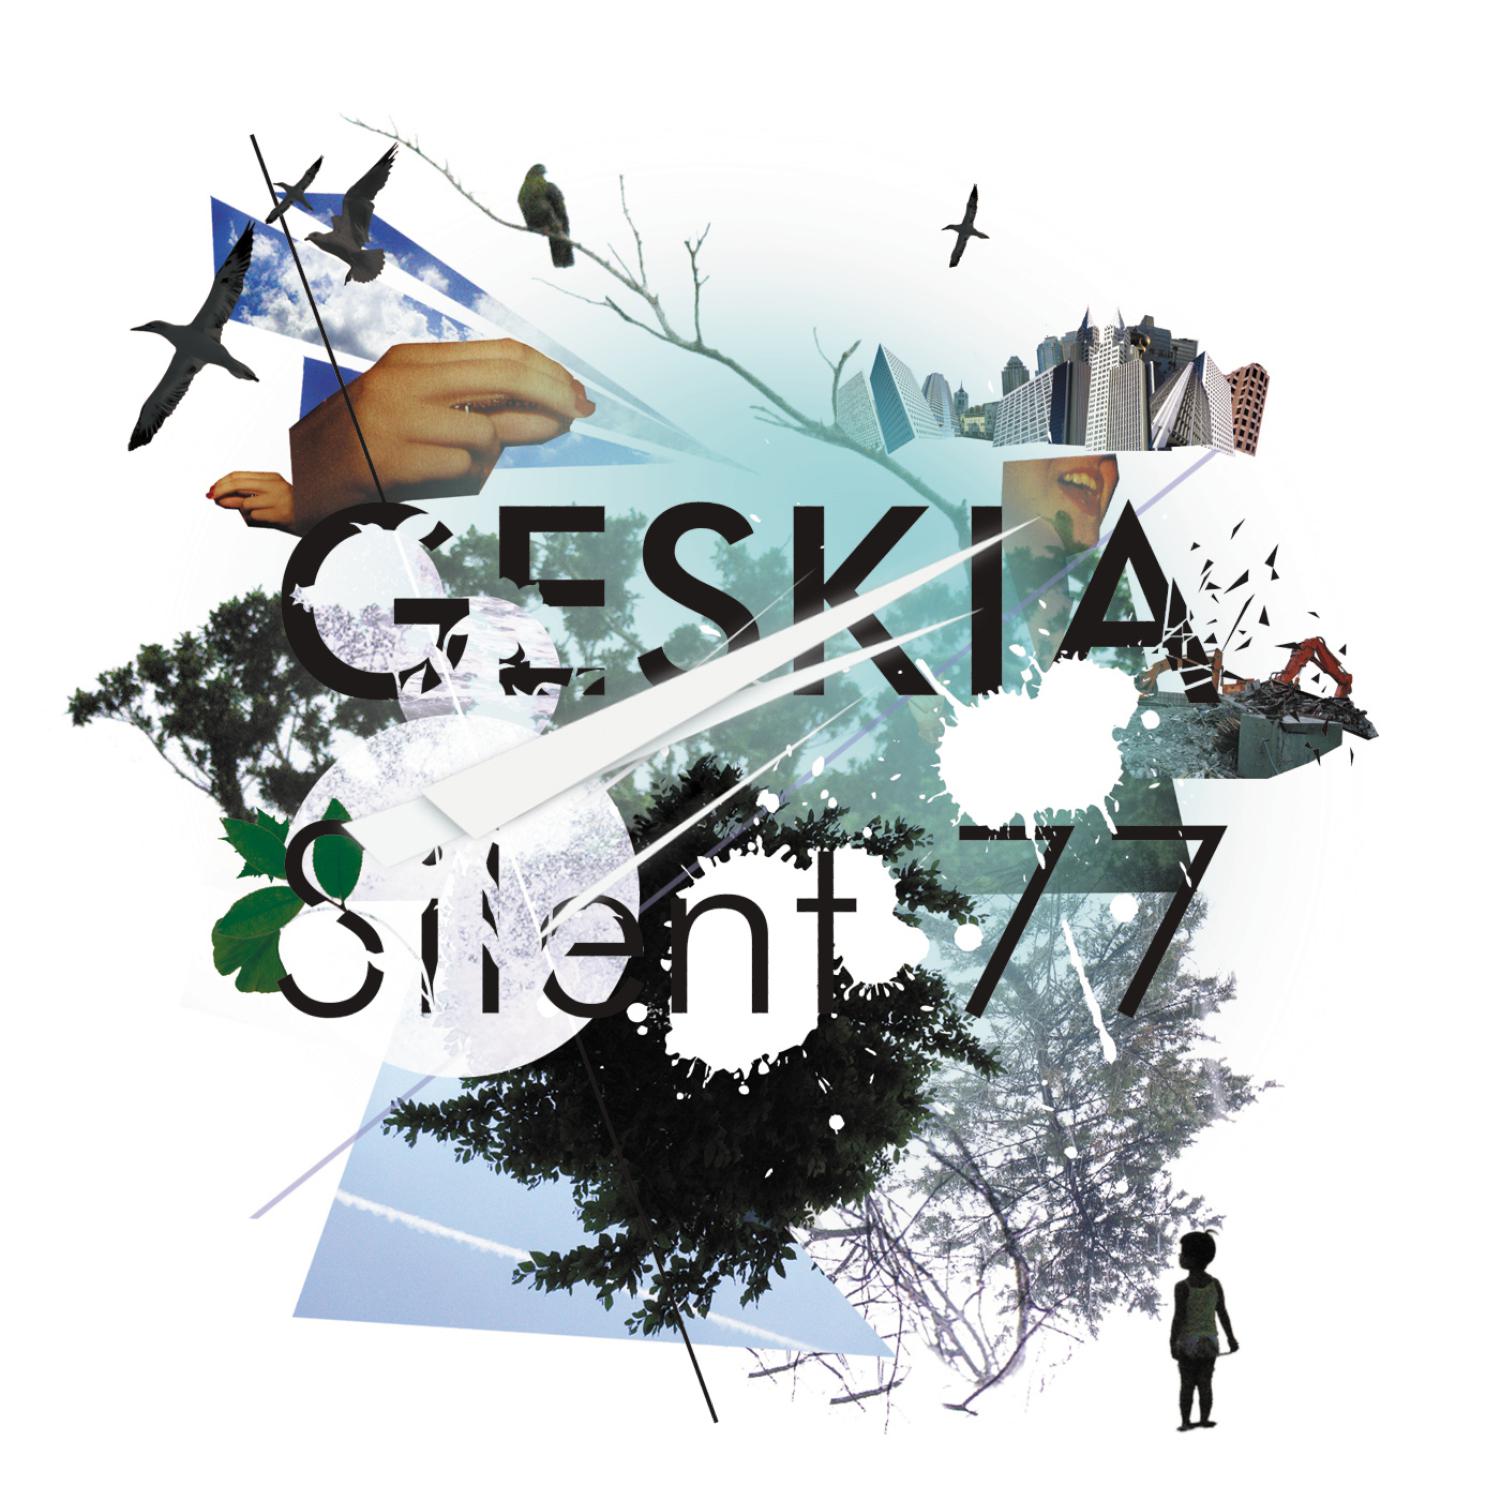 Geskia - Second Comming